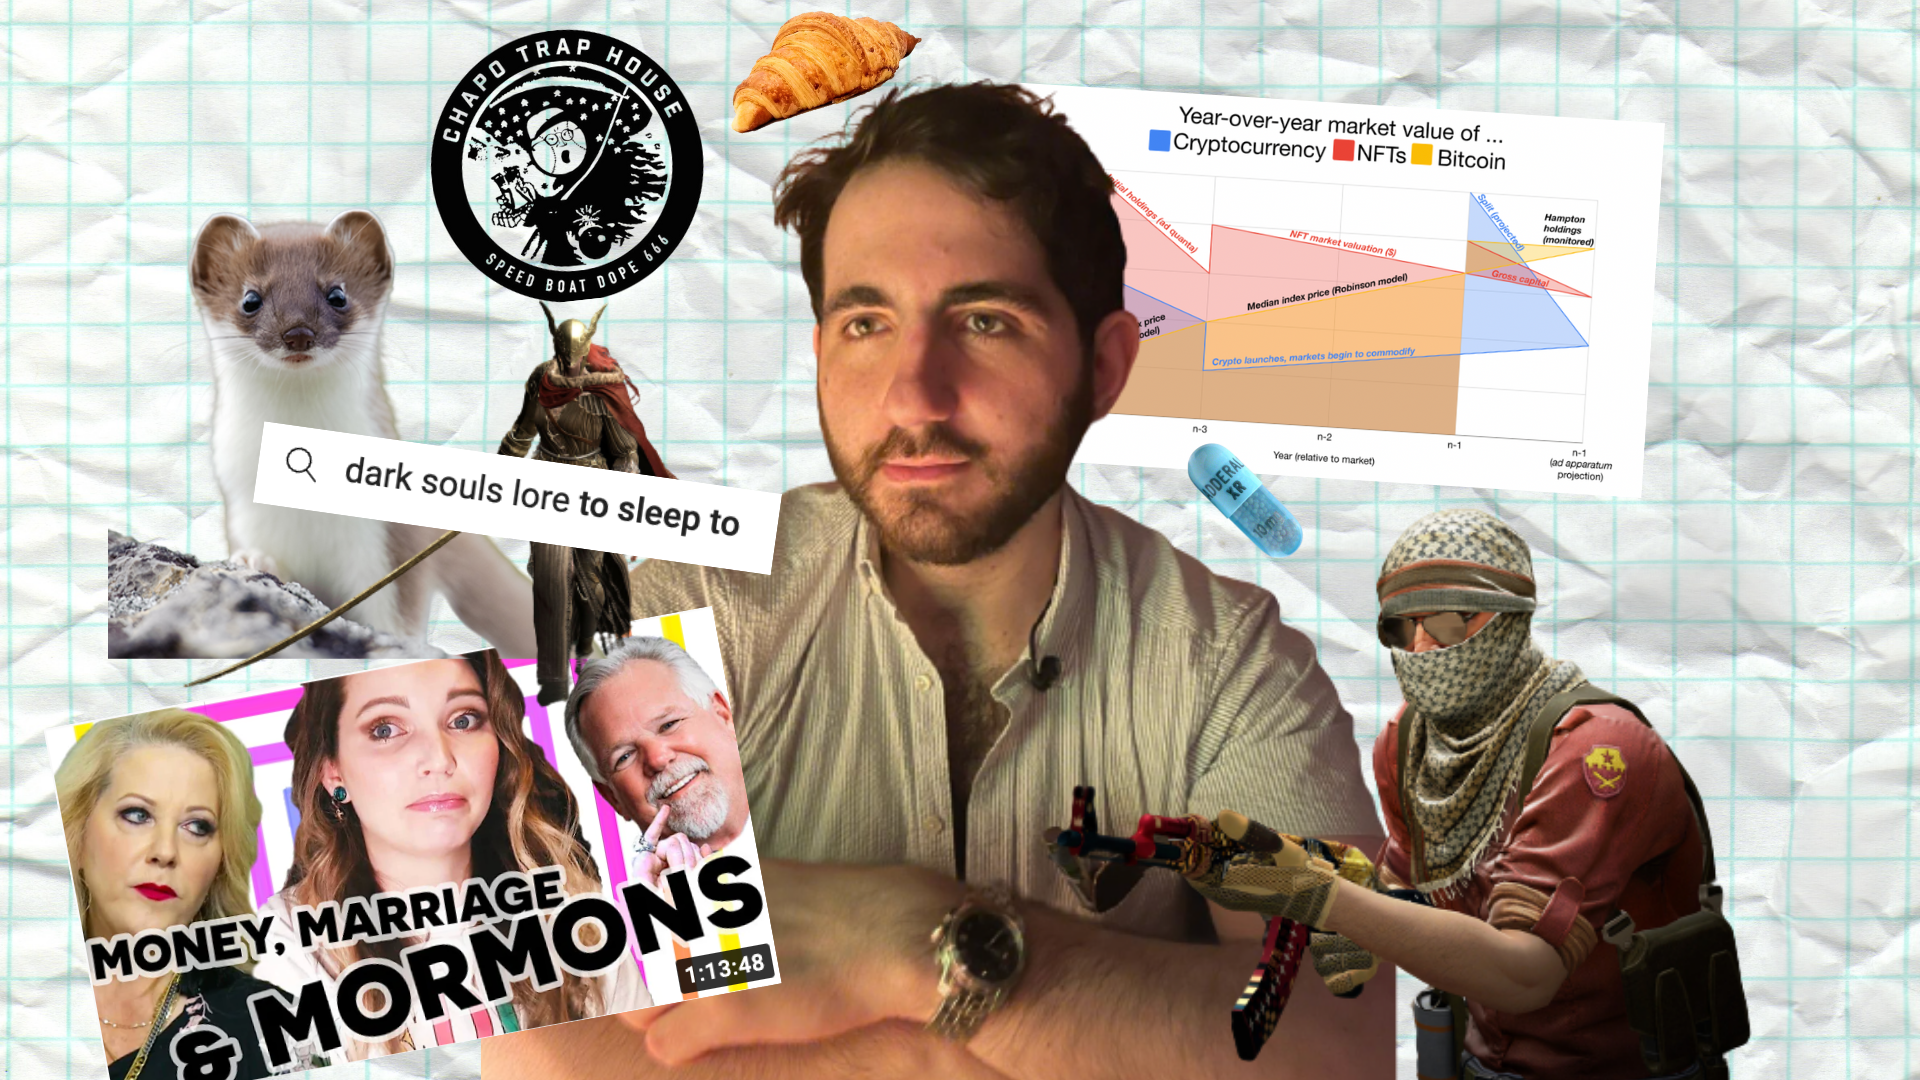 Photo collage of Felix Biederman surrounded by a weasel, a video game figure with a gun, and other images of online subjects he talks about.